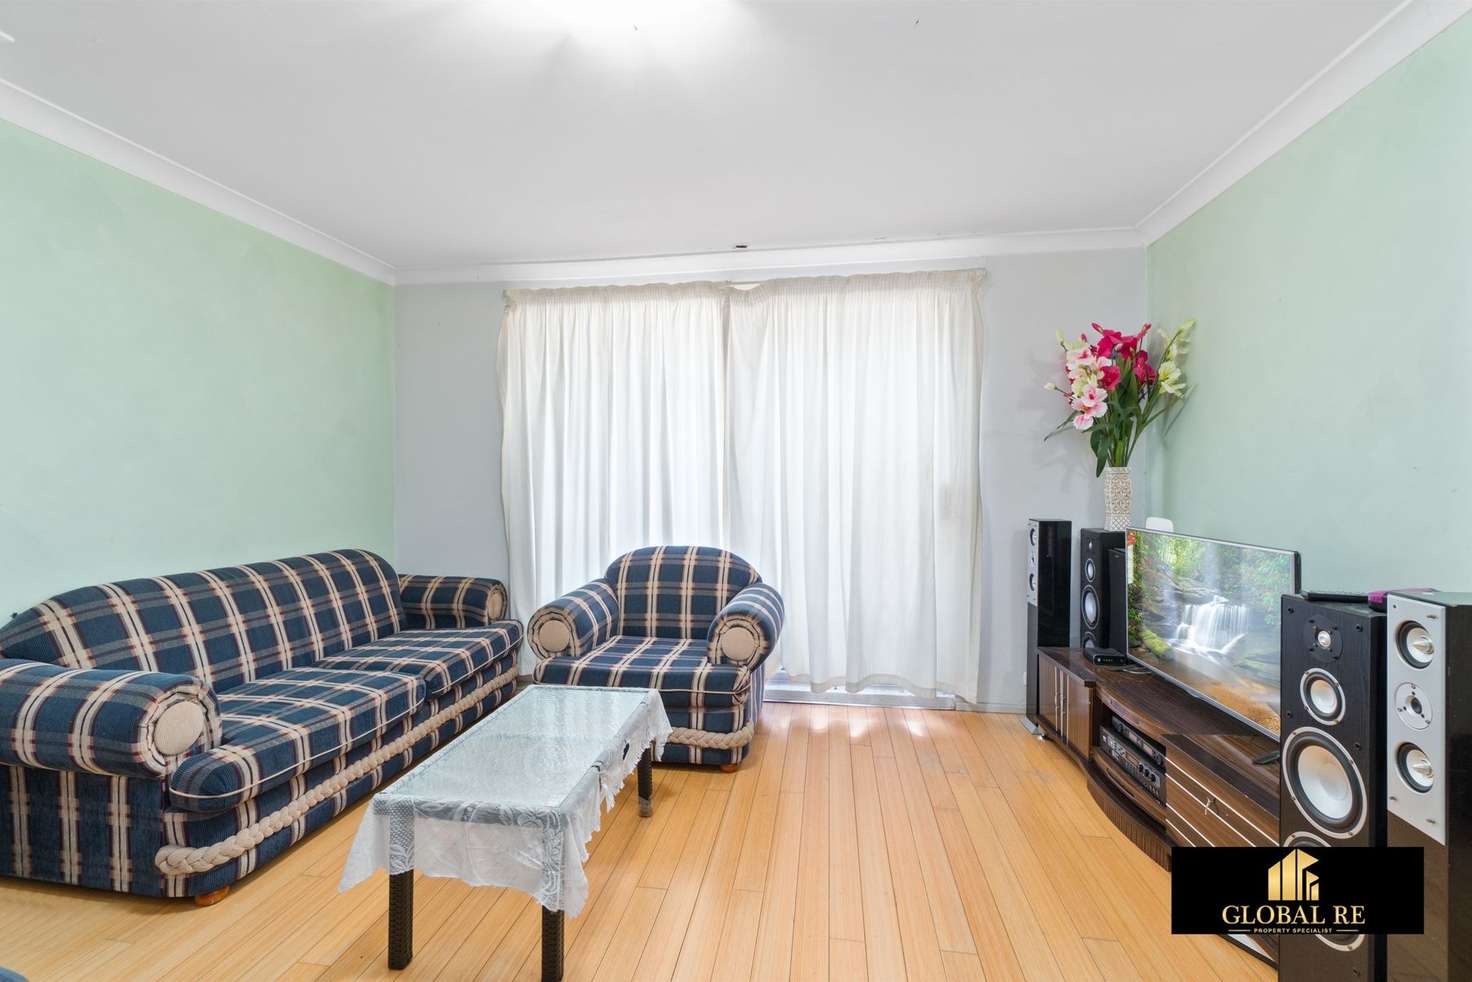 Main view of Homely unit listing, 47/25-29 Hughes Street, Cabramatta NSW 2166